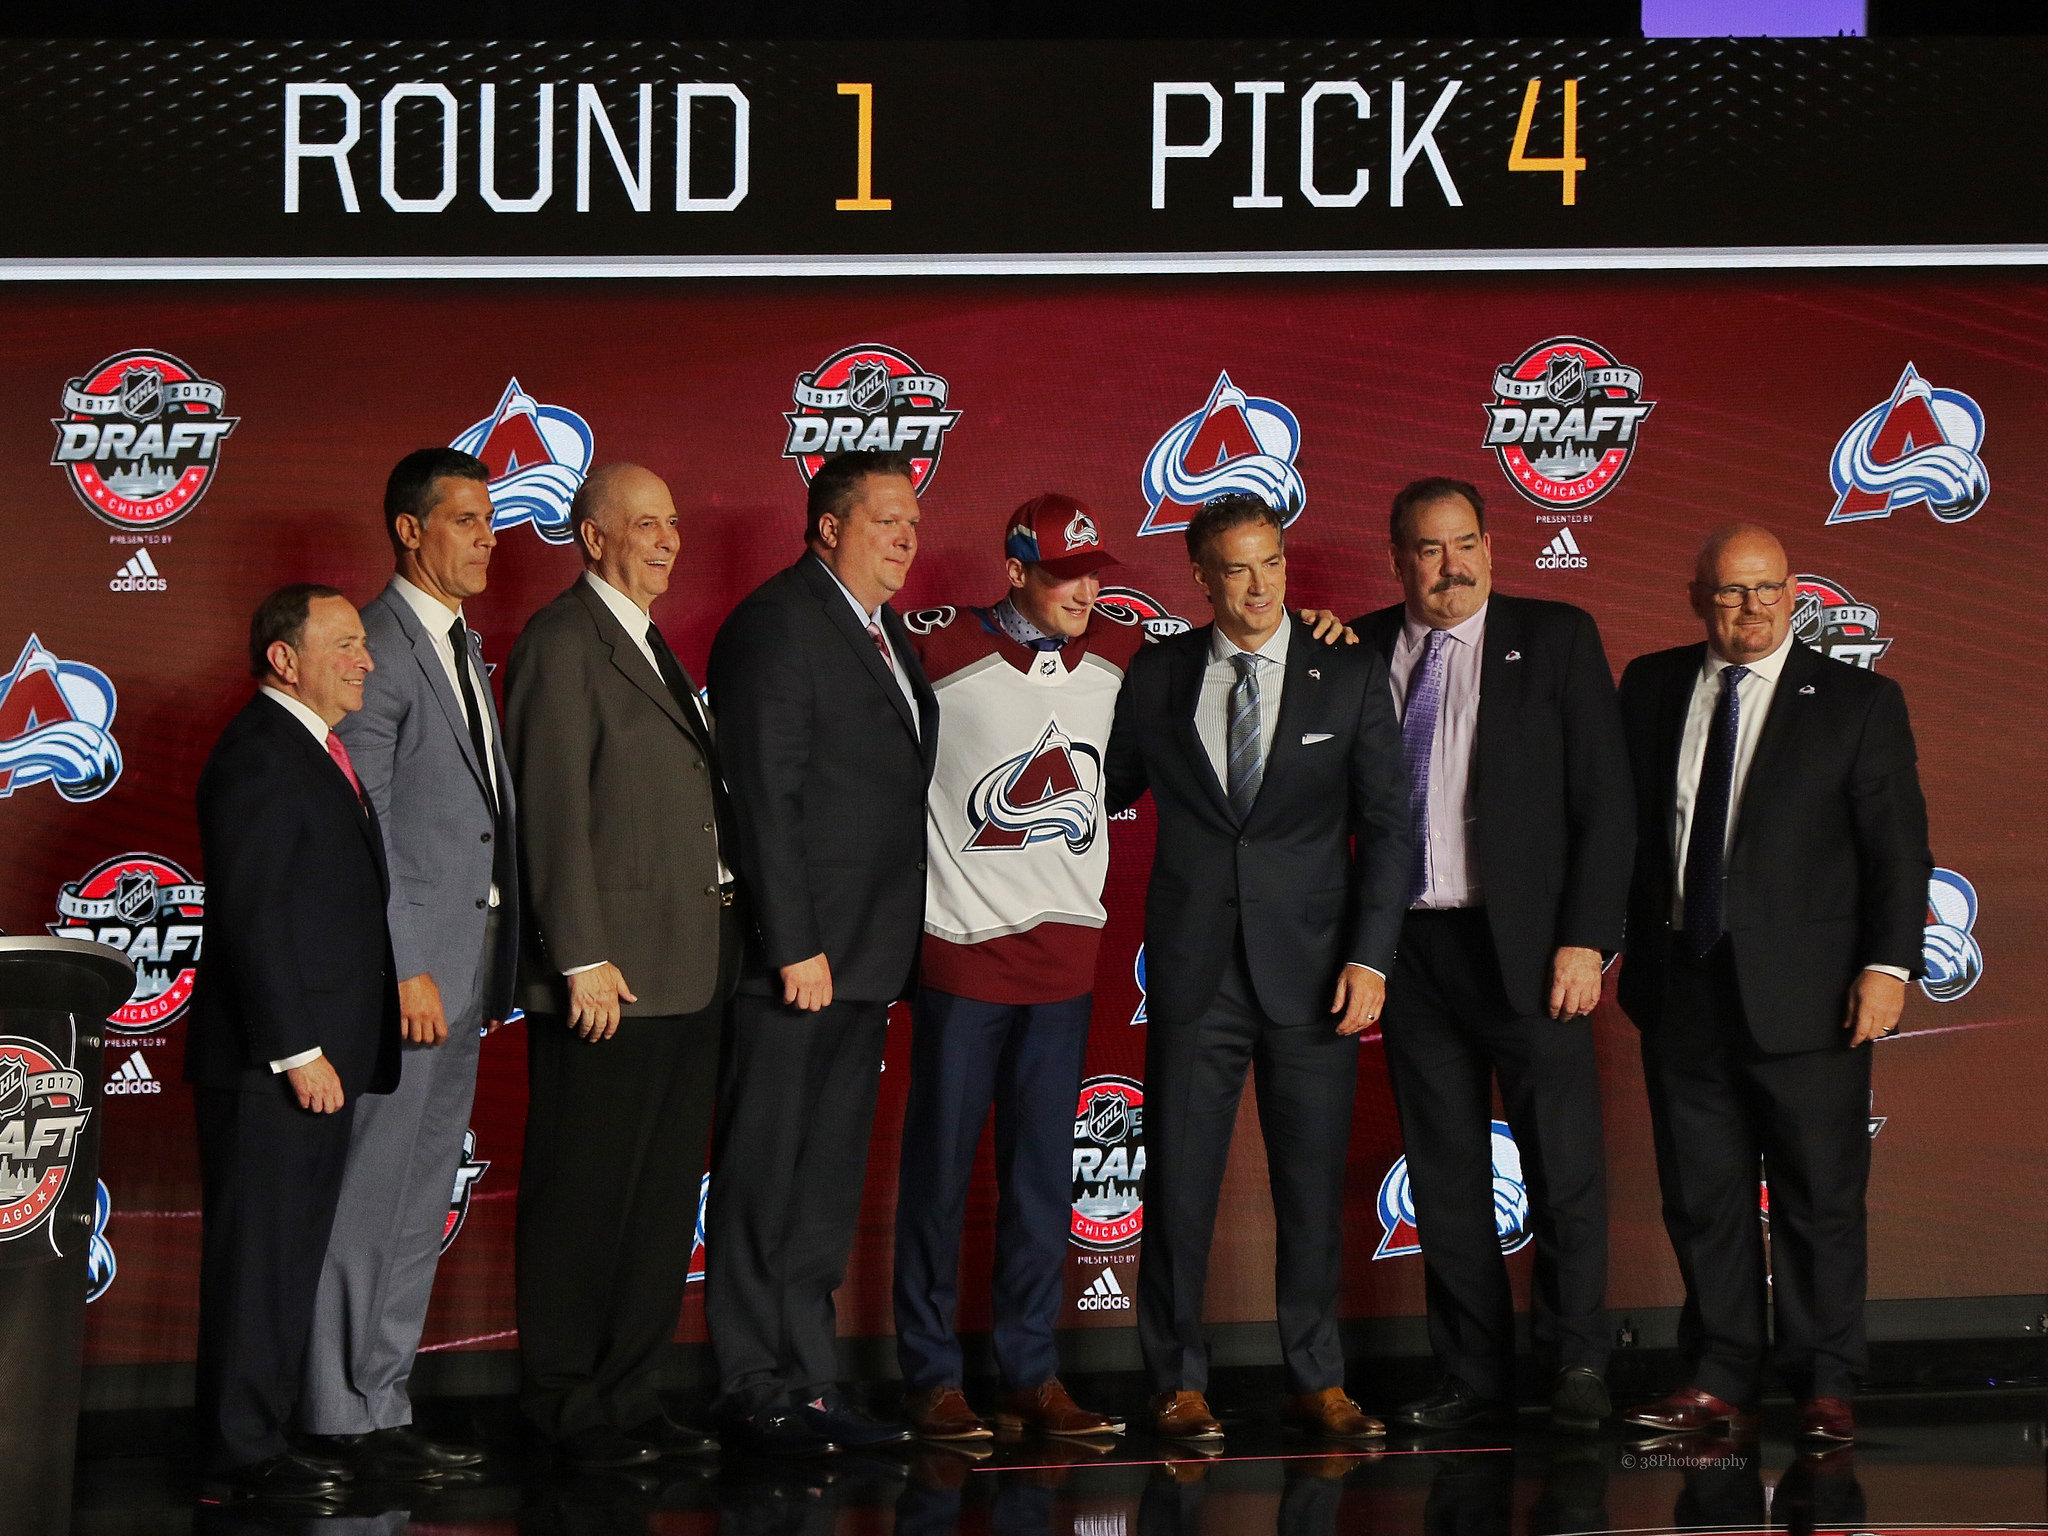 In Cale Makar, did Avalanche get best player in 2017 NHL Draft?